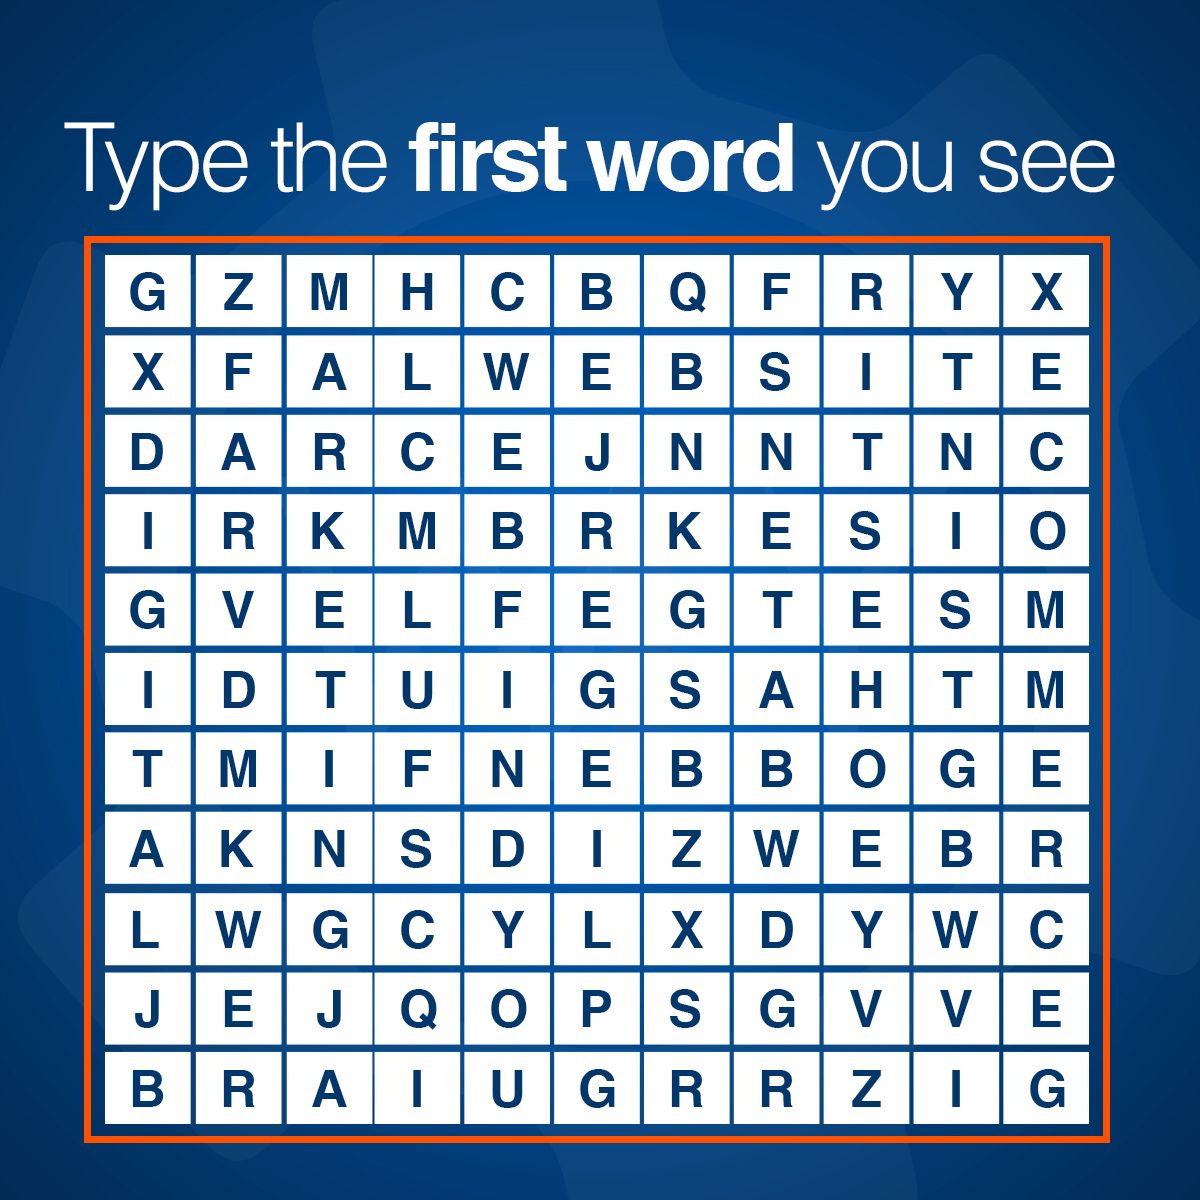 Type the first word you see